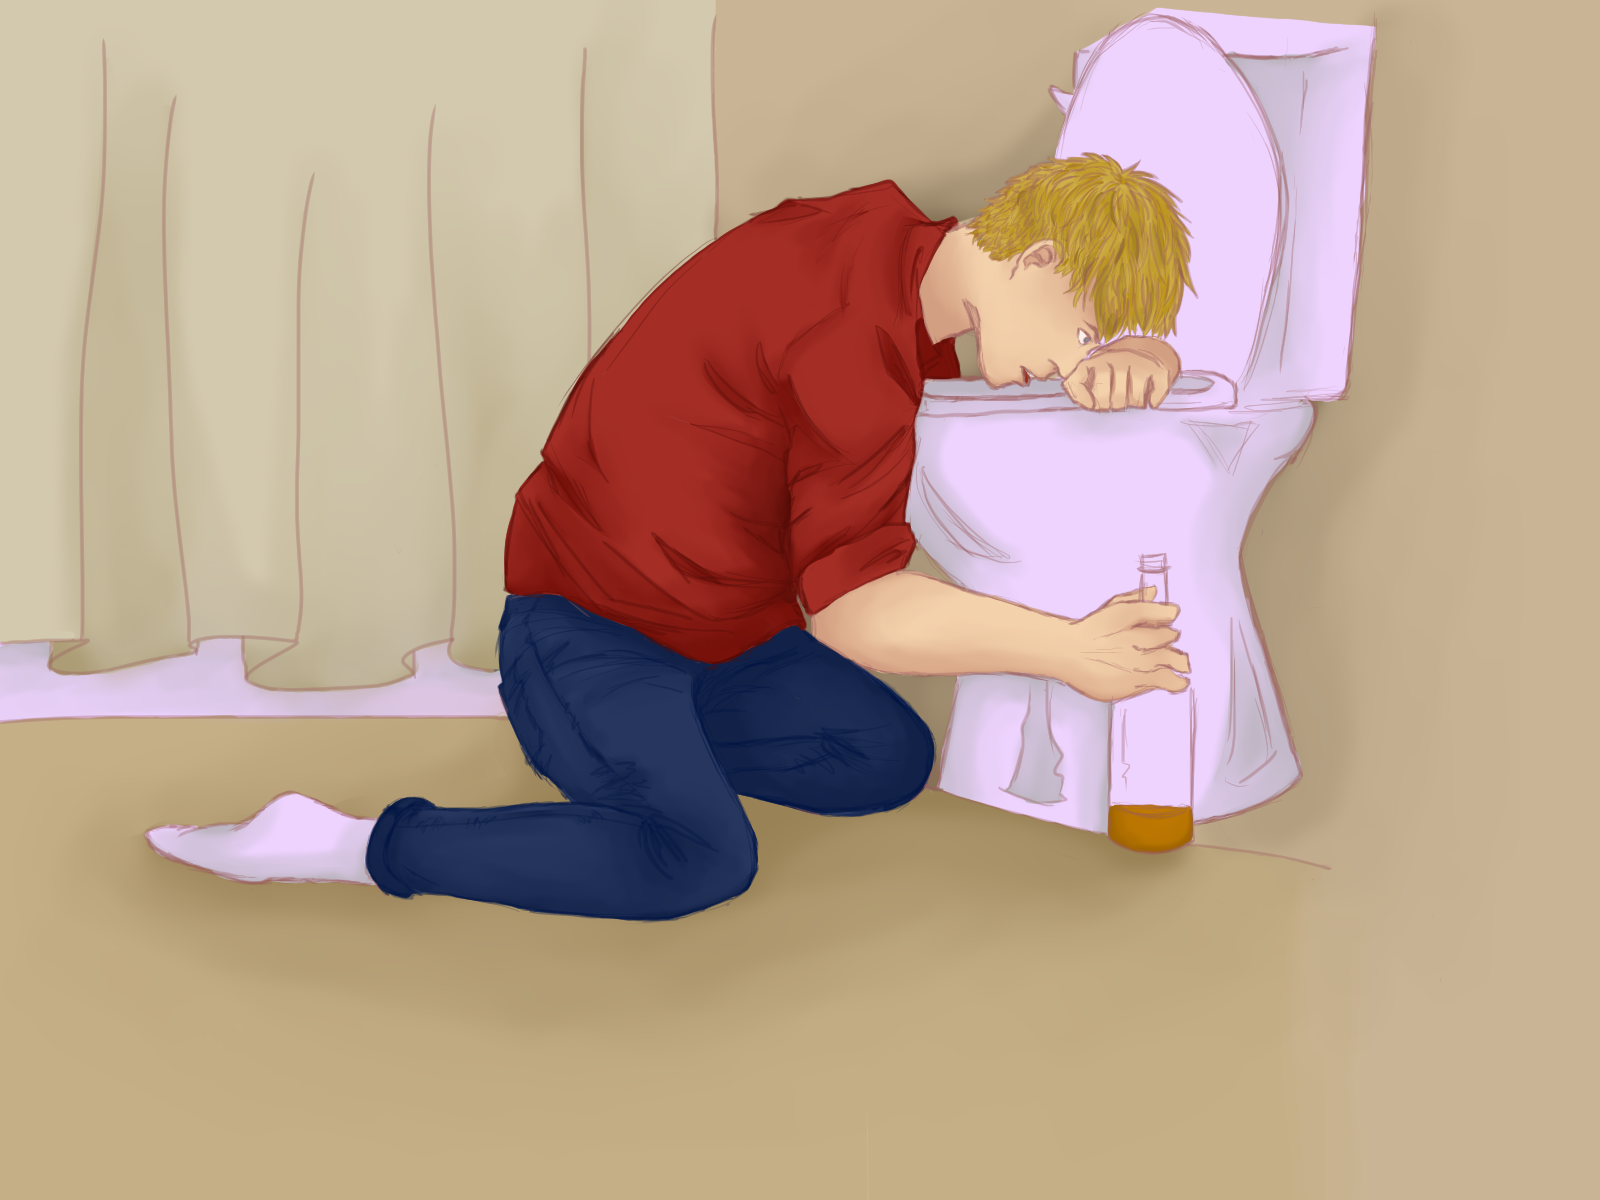 a man throwing up into a toilet